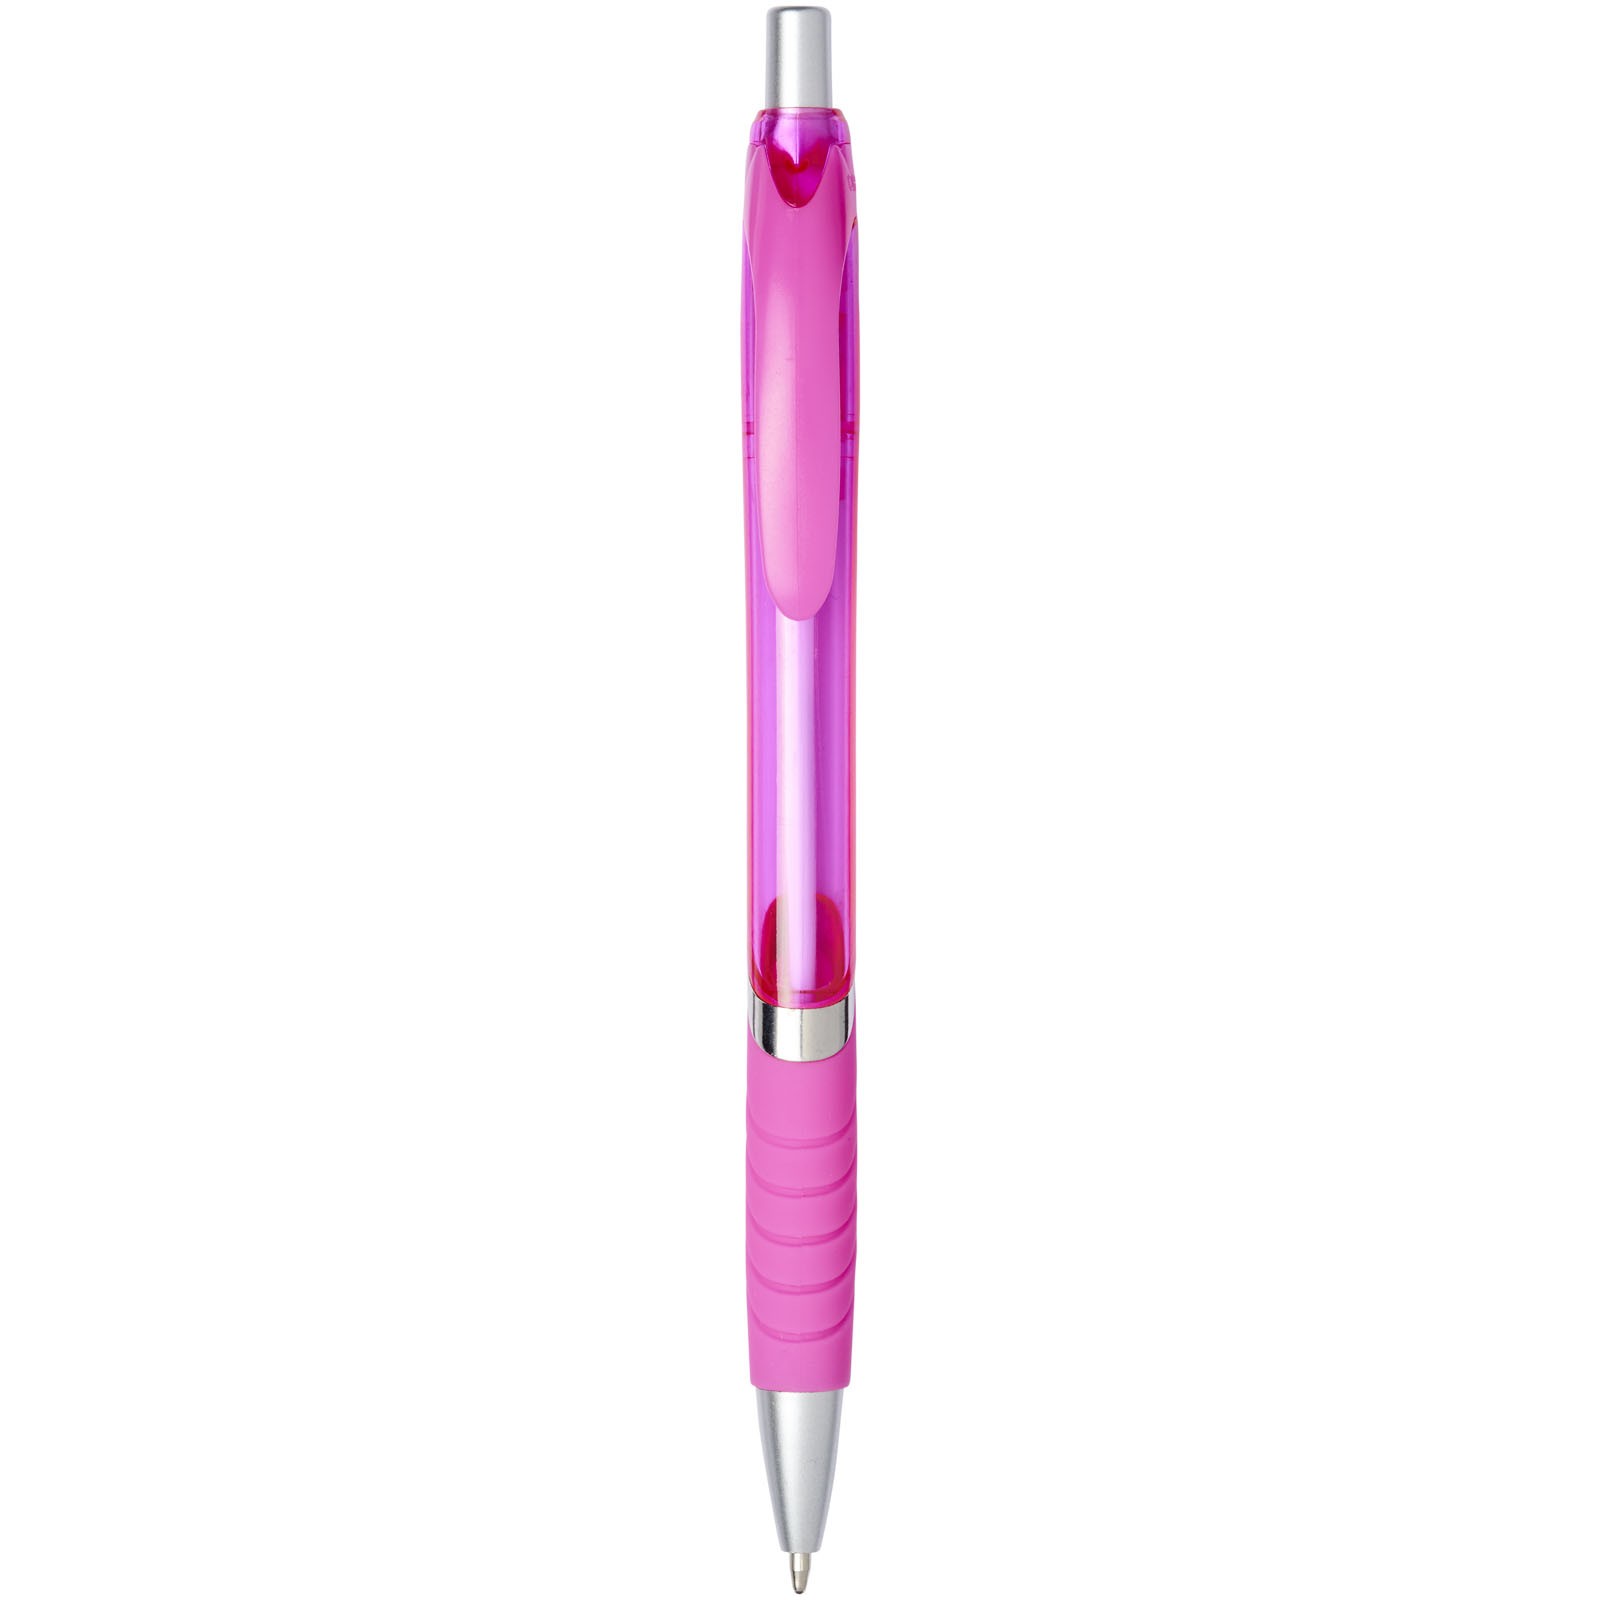 Turbo ballpoint pen with rubber grip - Magenta